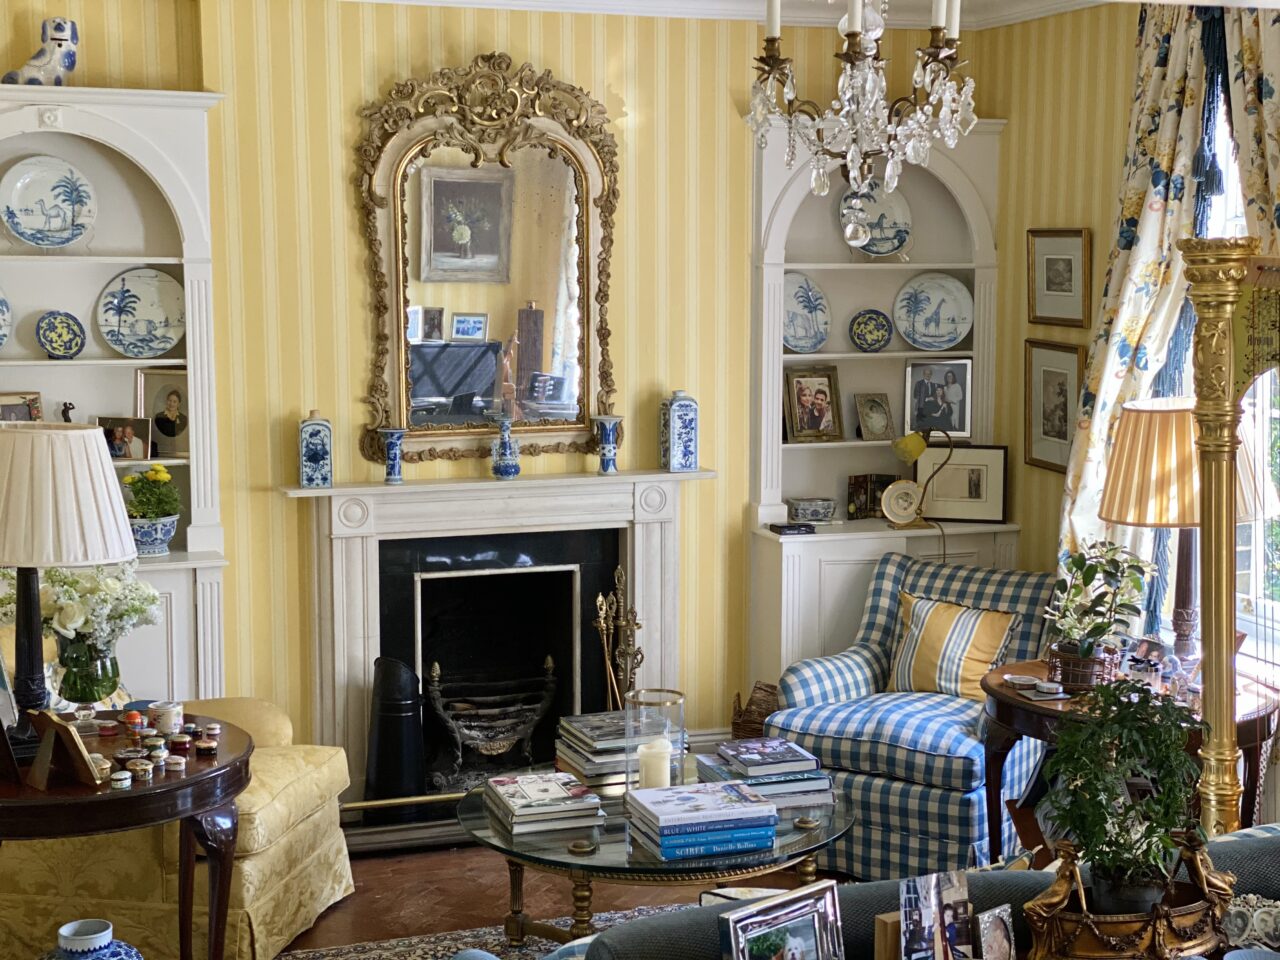 Is Country Decor Still Fashionable Today?